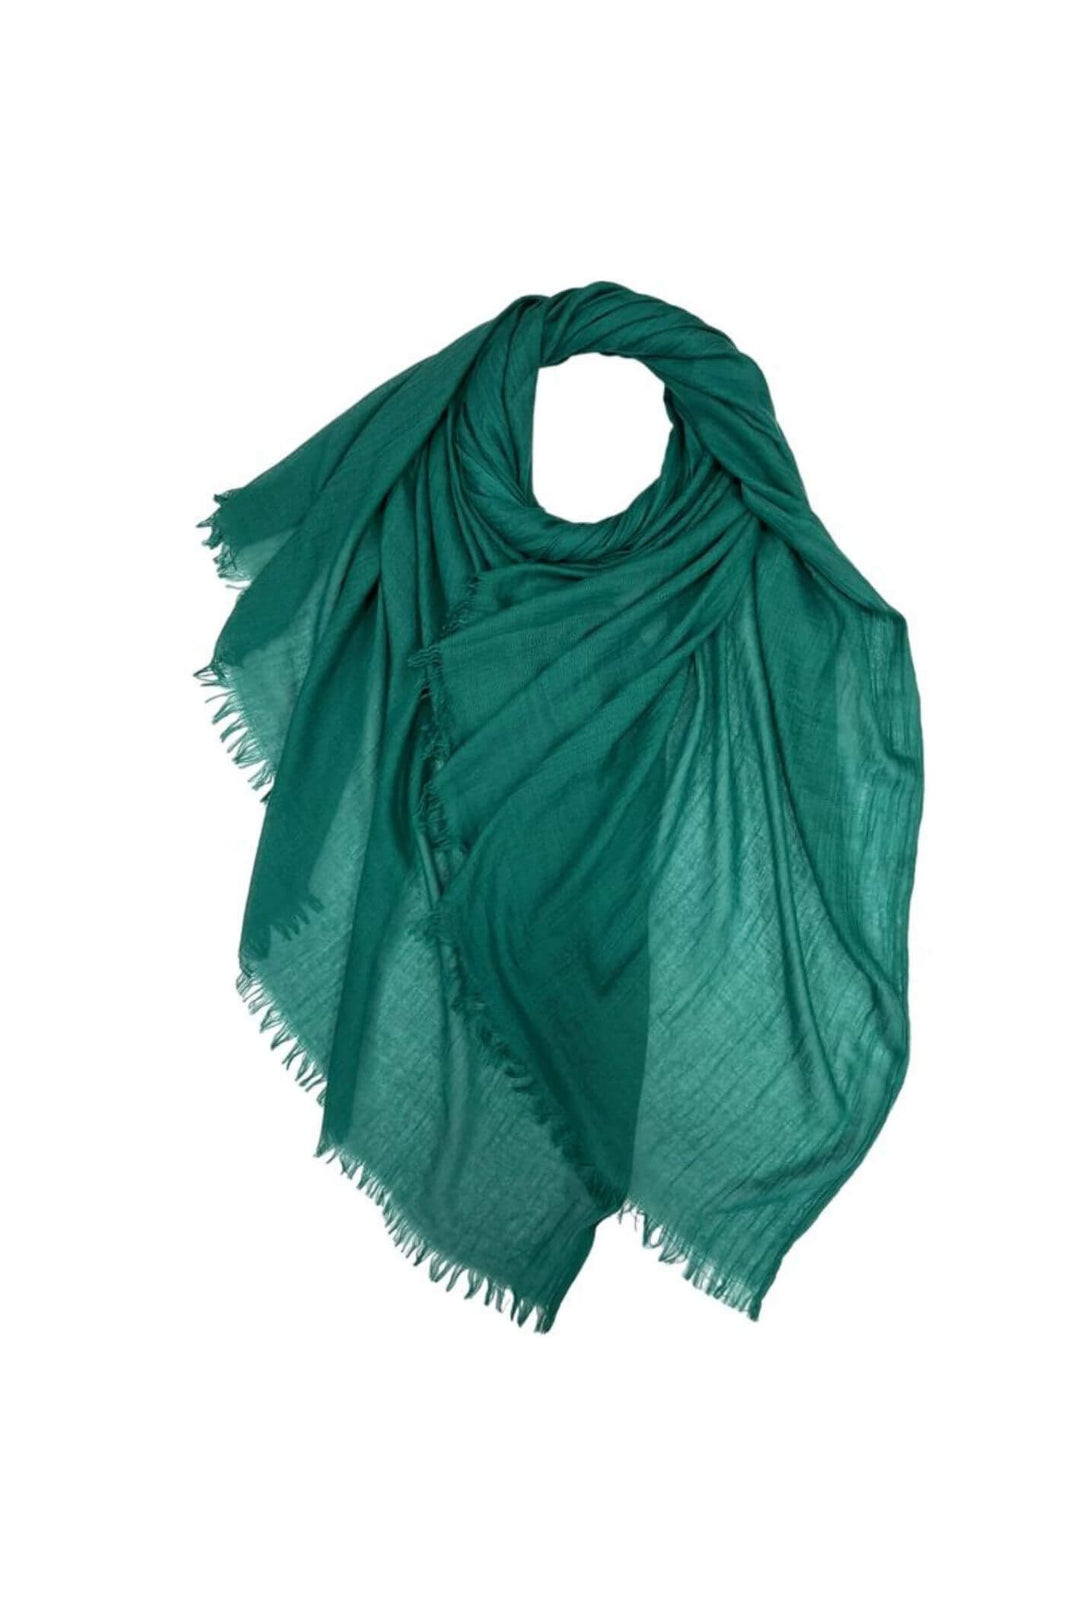 Sea Green Cotton Woven Scarf With Fringed Edge